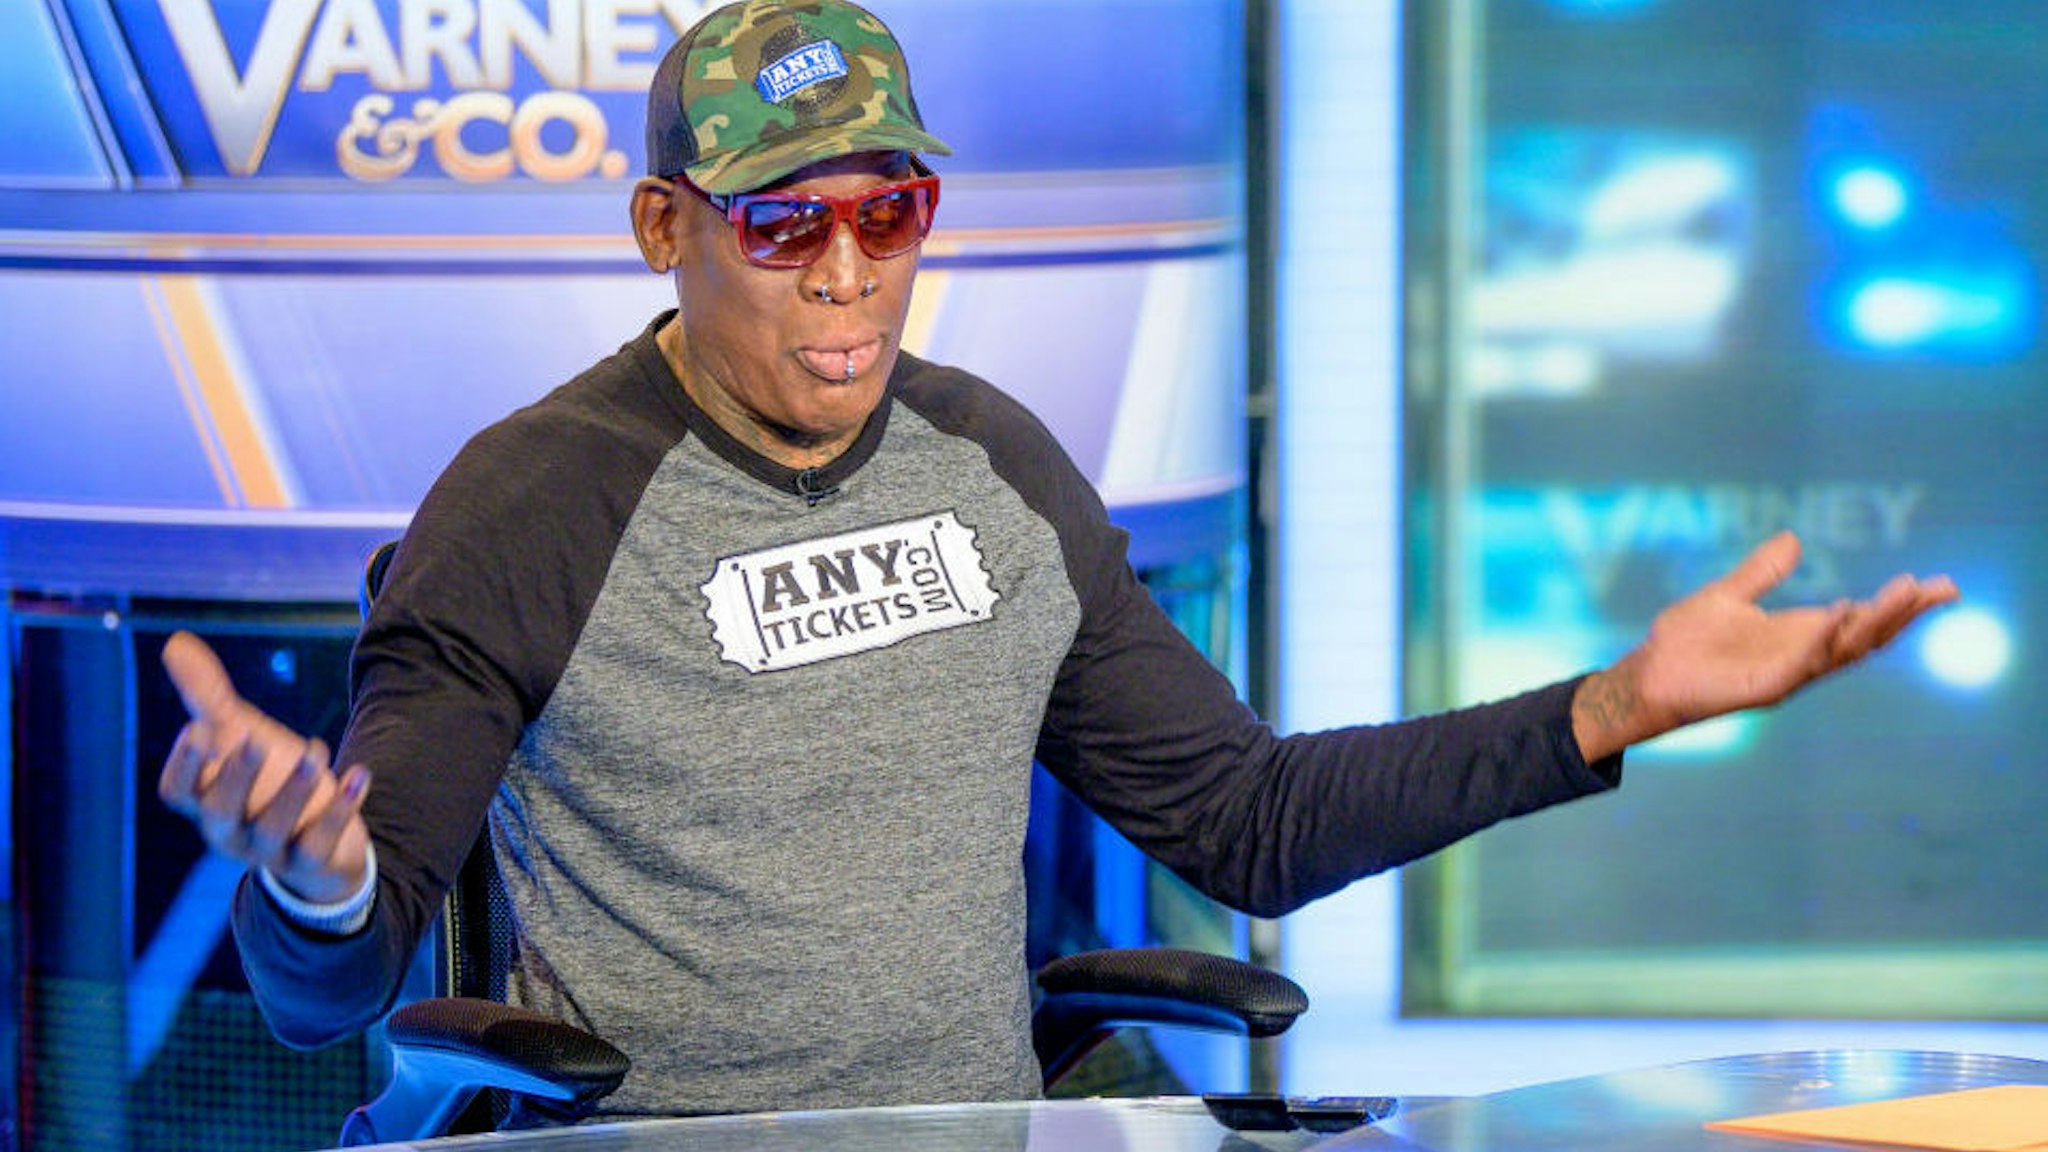 Former NBA Basketball player Dennis Rodman visits "Varney & Co." with guest-host David Asman at Fox Business Network Studios on September 18, 2019 in New York City.